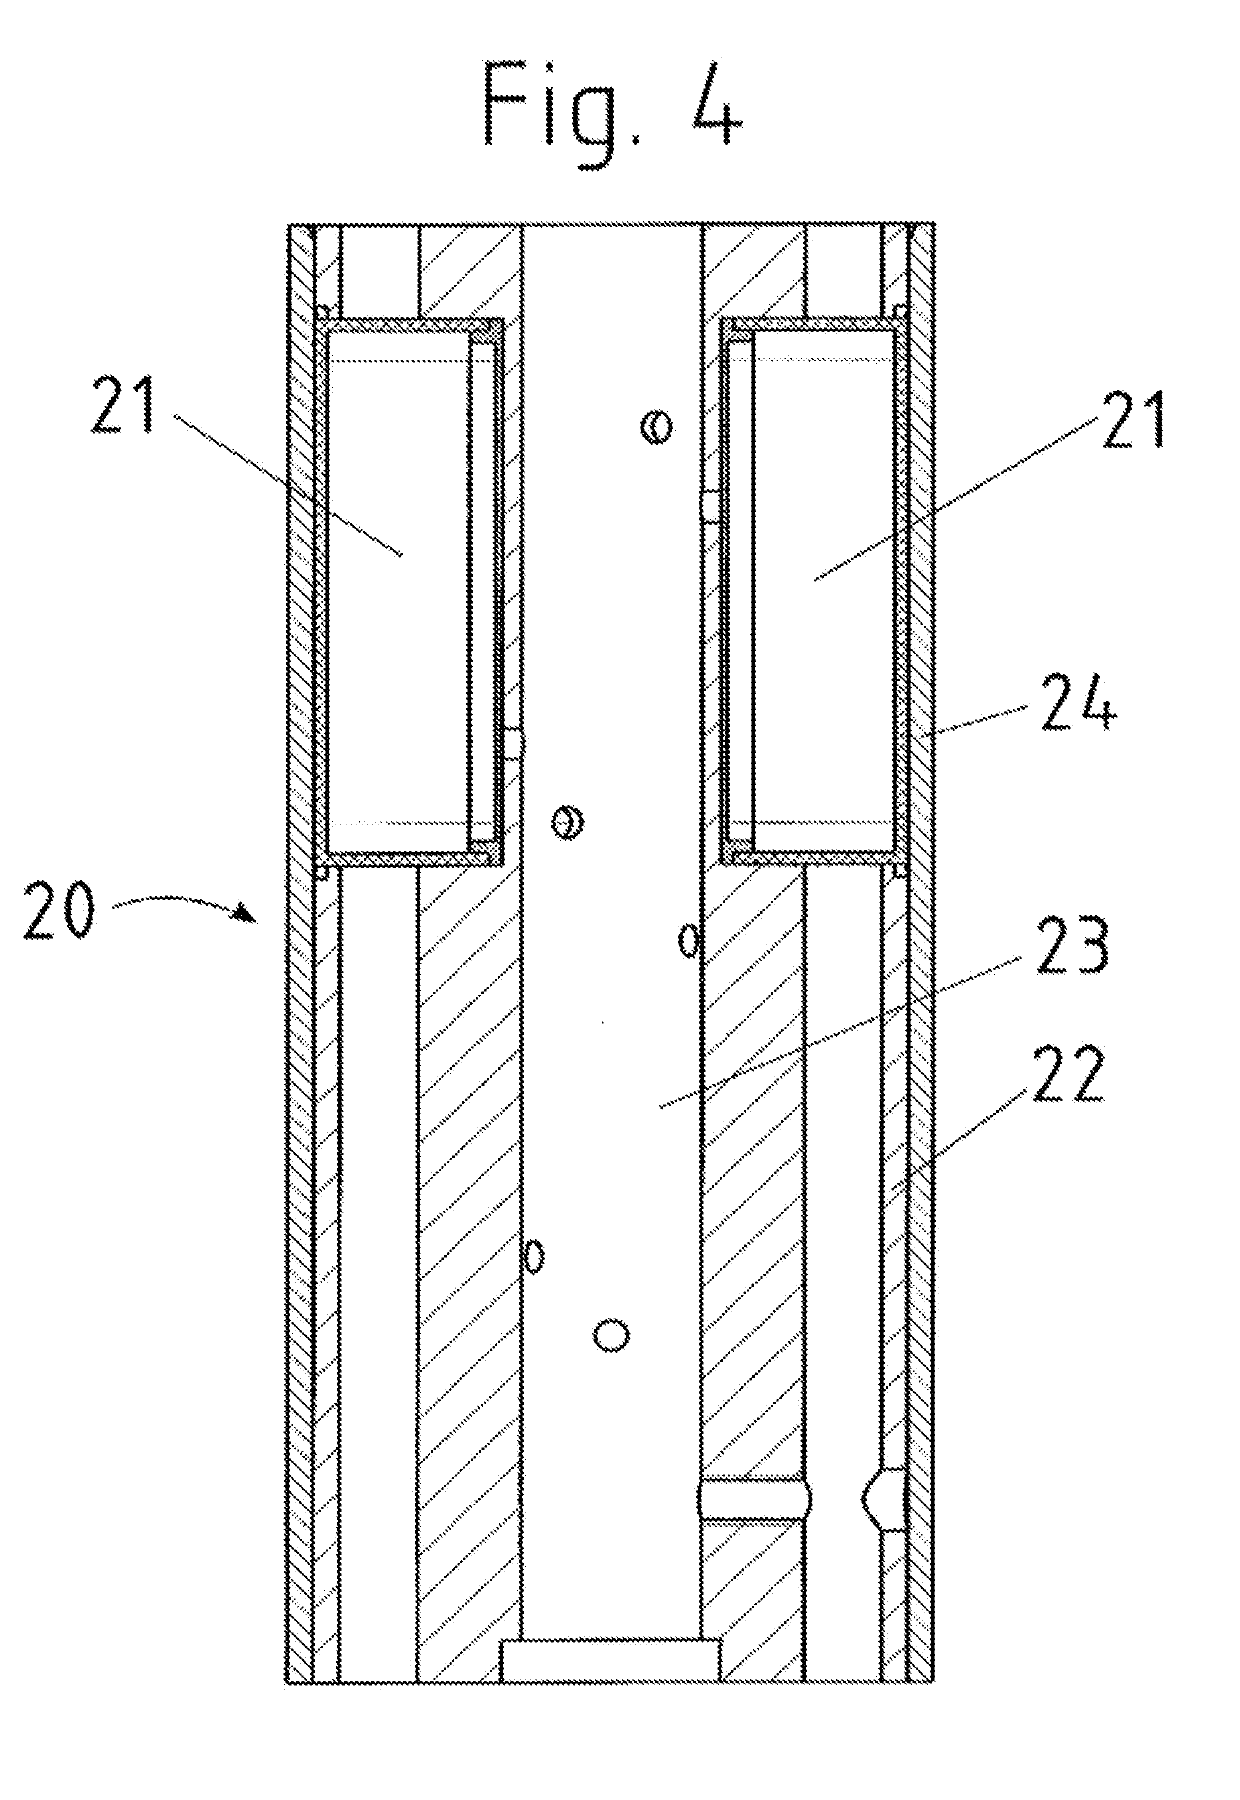 Stun grenade and method for production thereof